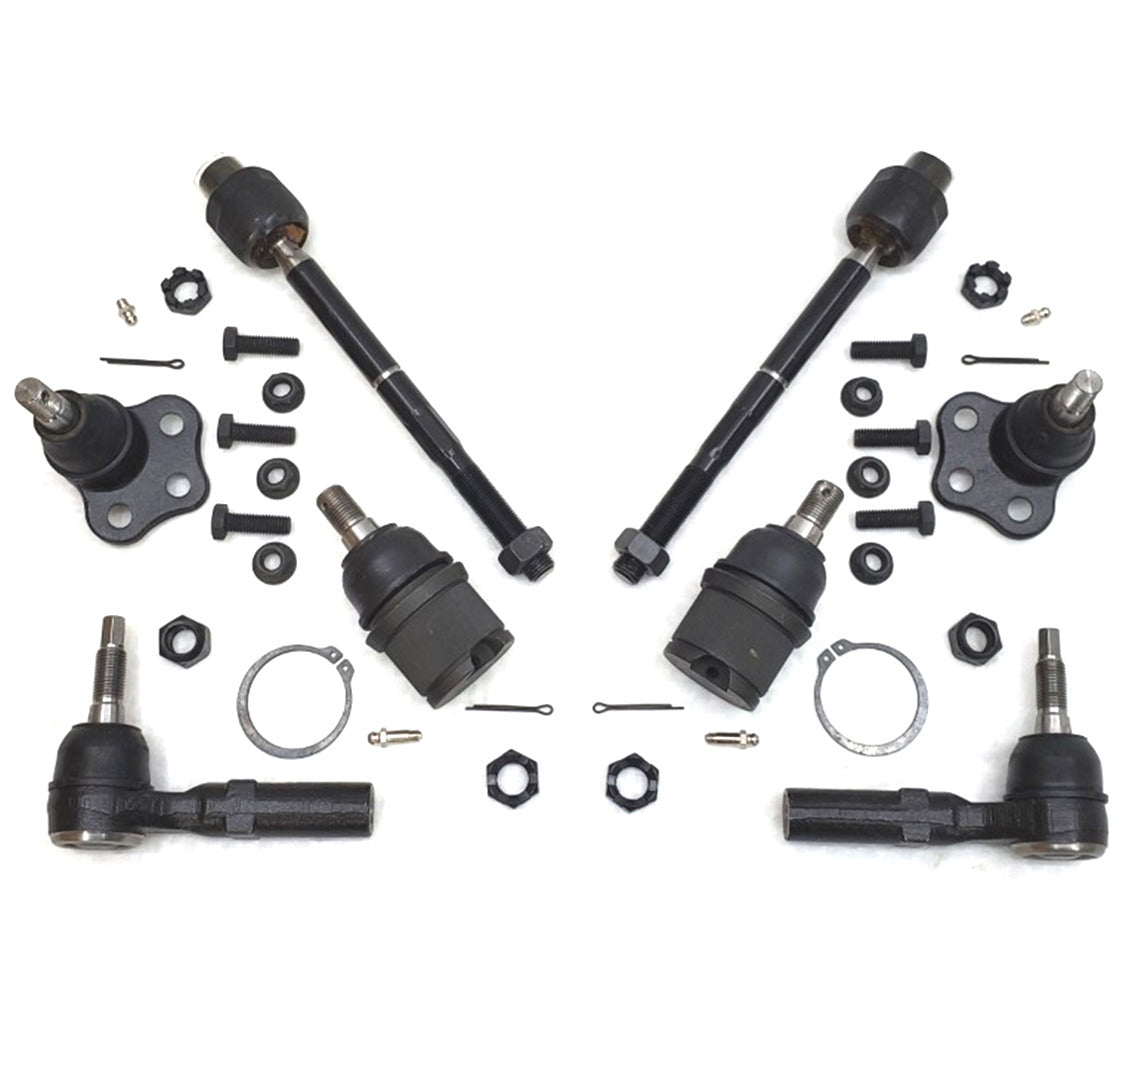 HD Ball Joint and Tie Rod End Steering Kit for 2000-2003 Dodge Durango, Dakota 4x4